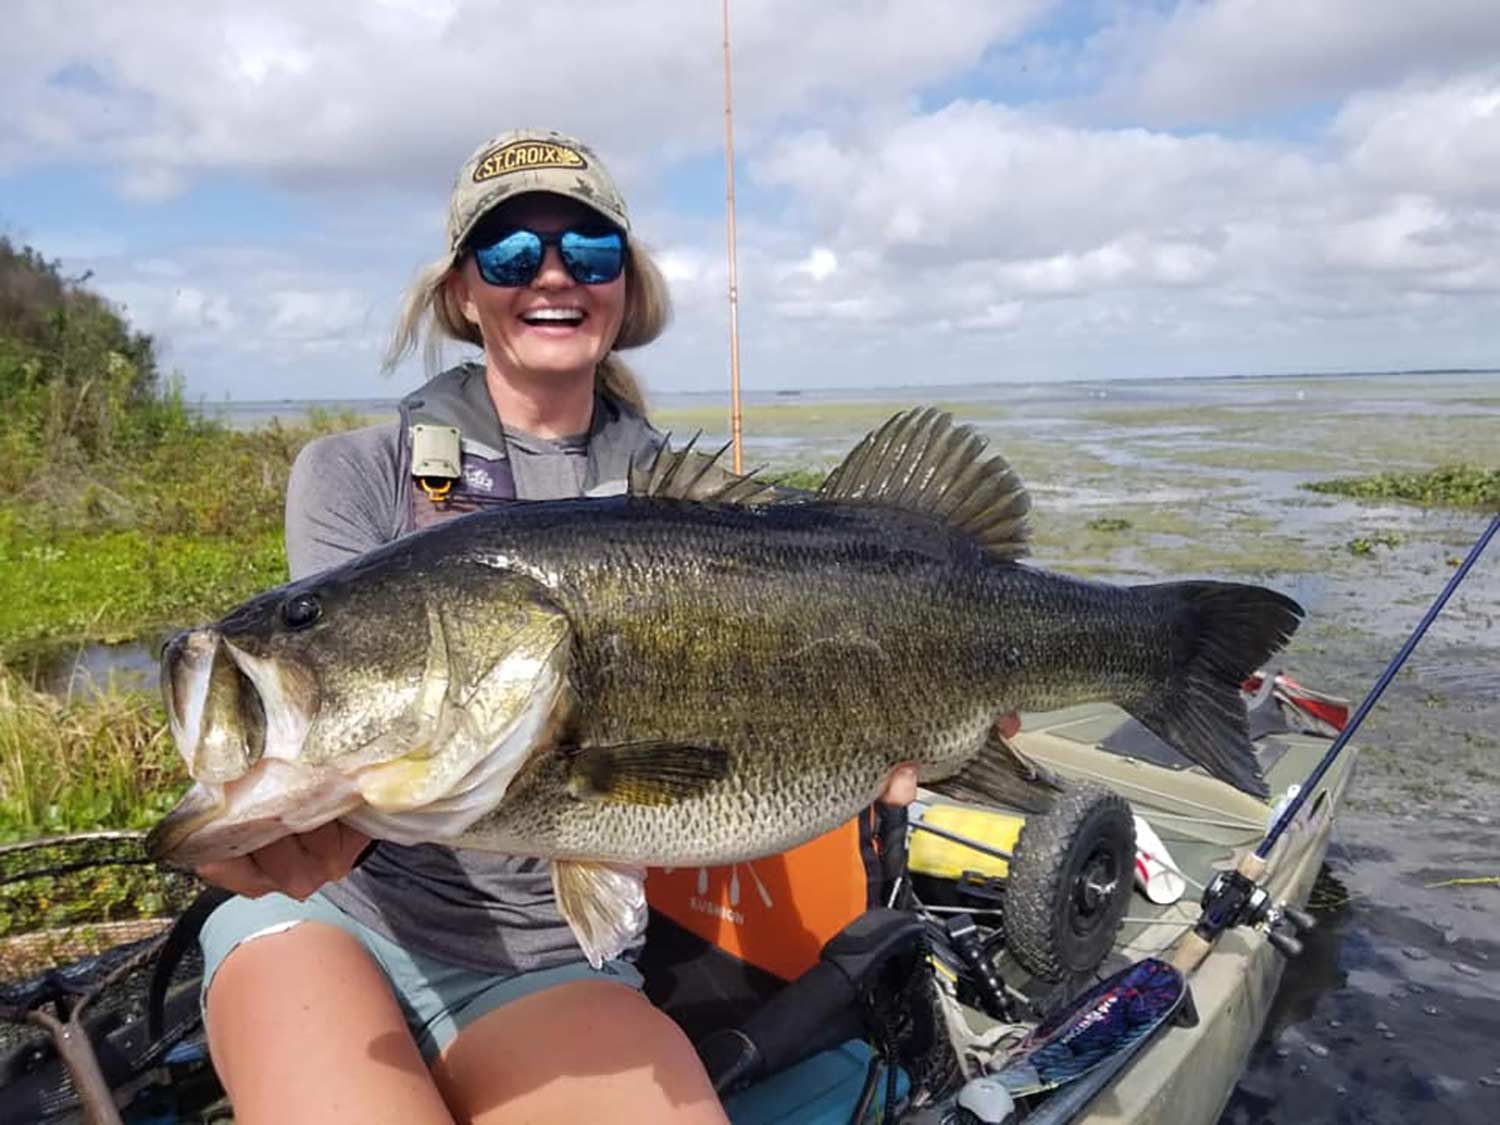 Woman angler holds up a largemouth bass while fishing from her kayak.